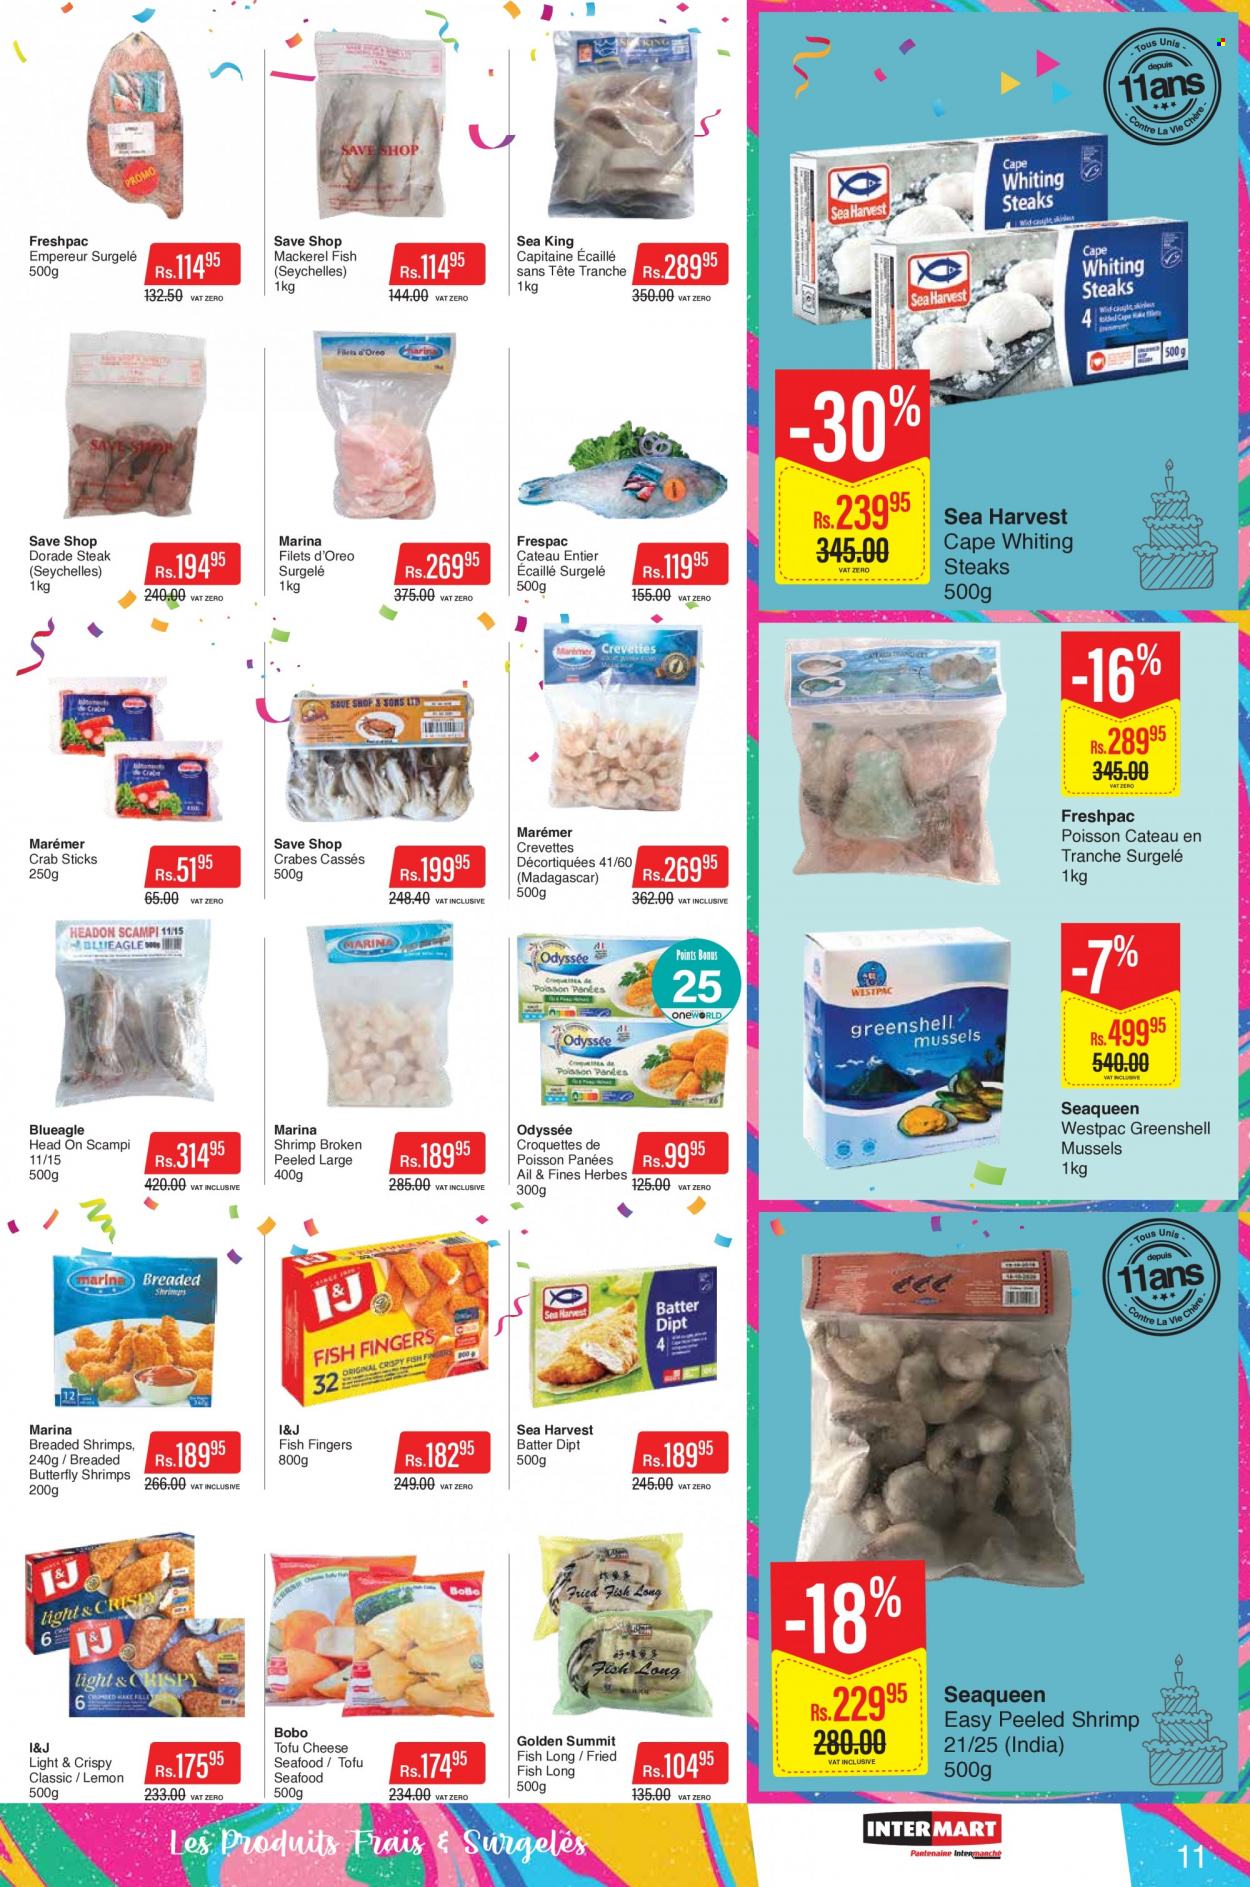 thumbnail - Intermart Catalogue - 23.09.2022 - 19.10.2022 - Sales products - mackerel, mussels, seafood, crab, fish, fish fingers, whiting, Sea Harvest, fish sticks, fried fish, cheese, tofu, potato croquettes, Oreo, steak. Page 11.